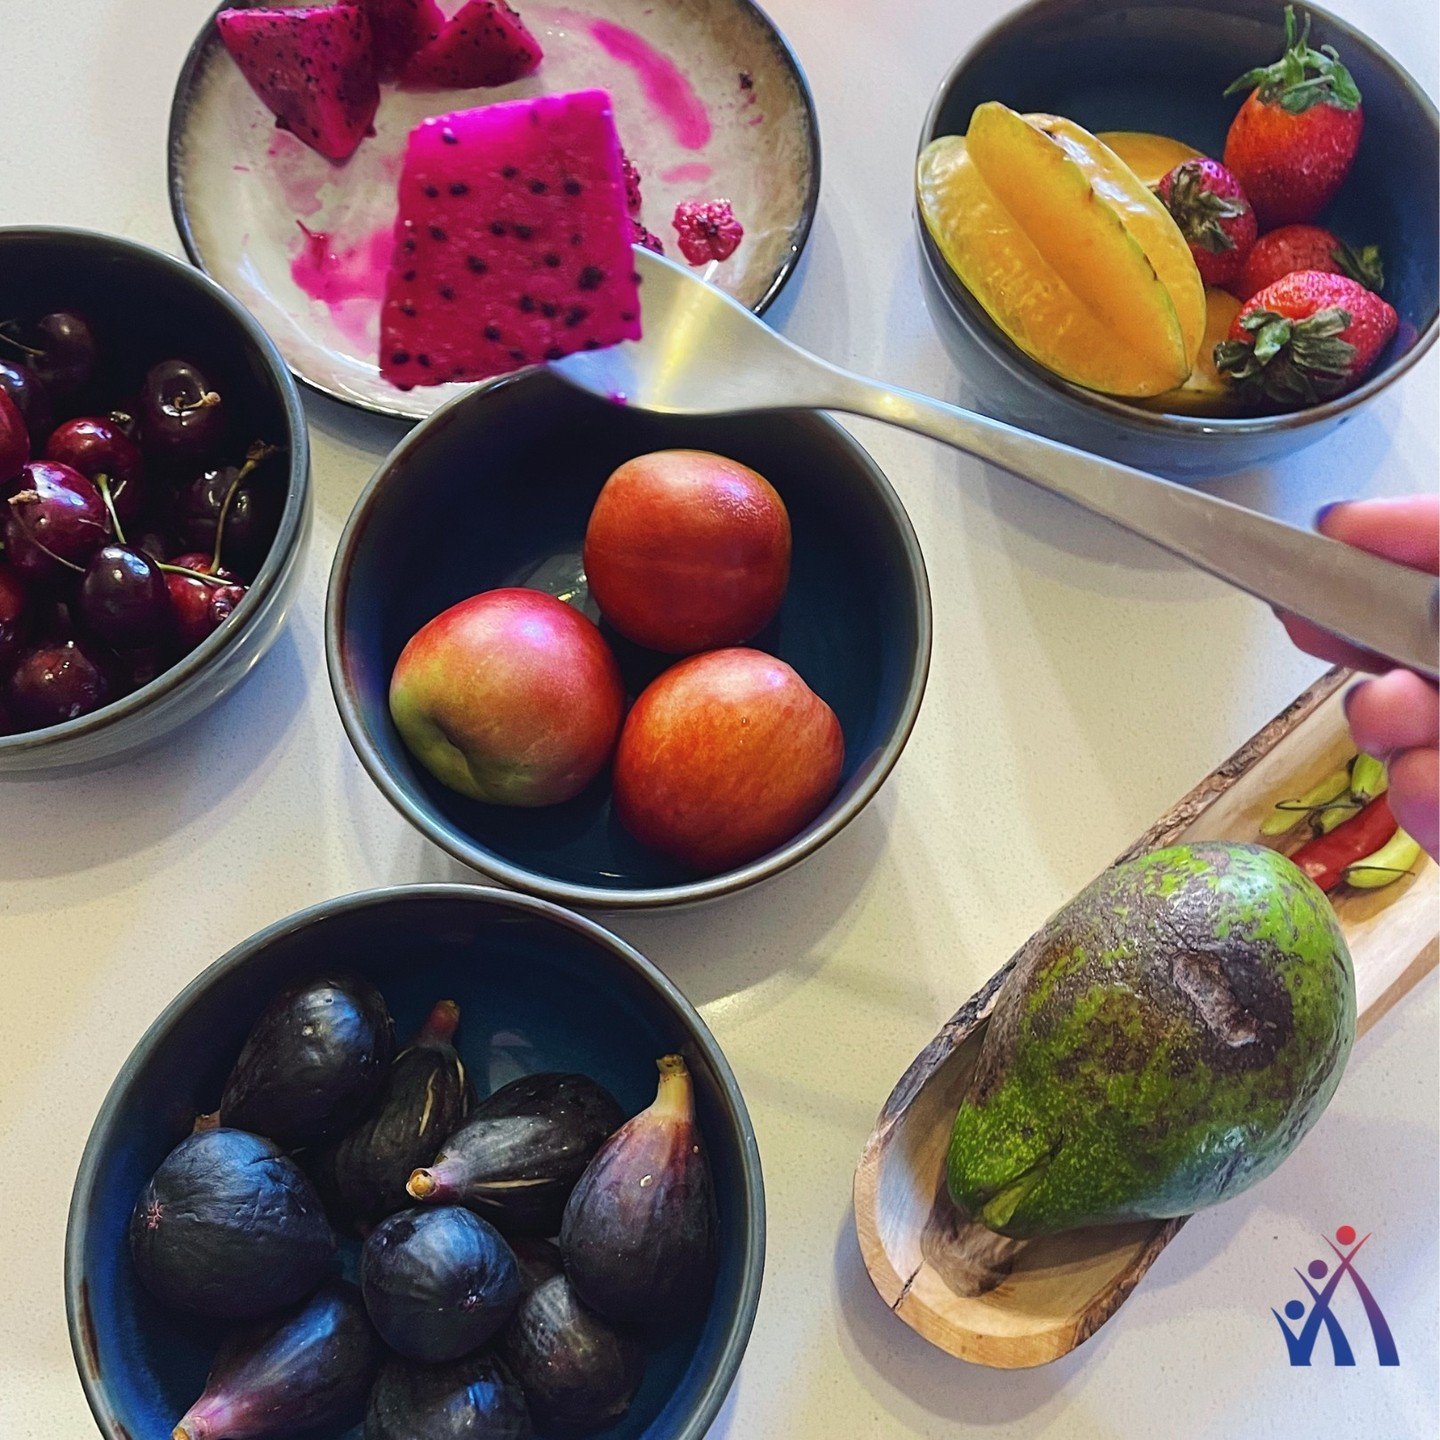 Celebrating this sunny Friday with some fresh fruits!

Nutritious Nature at LHI is a tailored program to nourish your body, uplift your health, and foster clarity of thought, guiding you towards a happy and healthy life.

Head to the link in our bio 